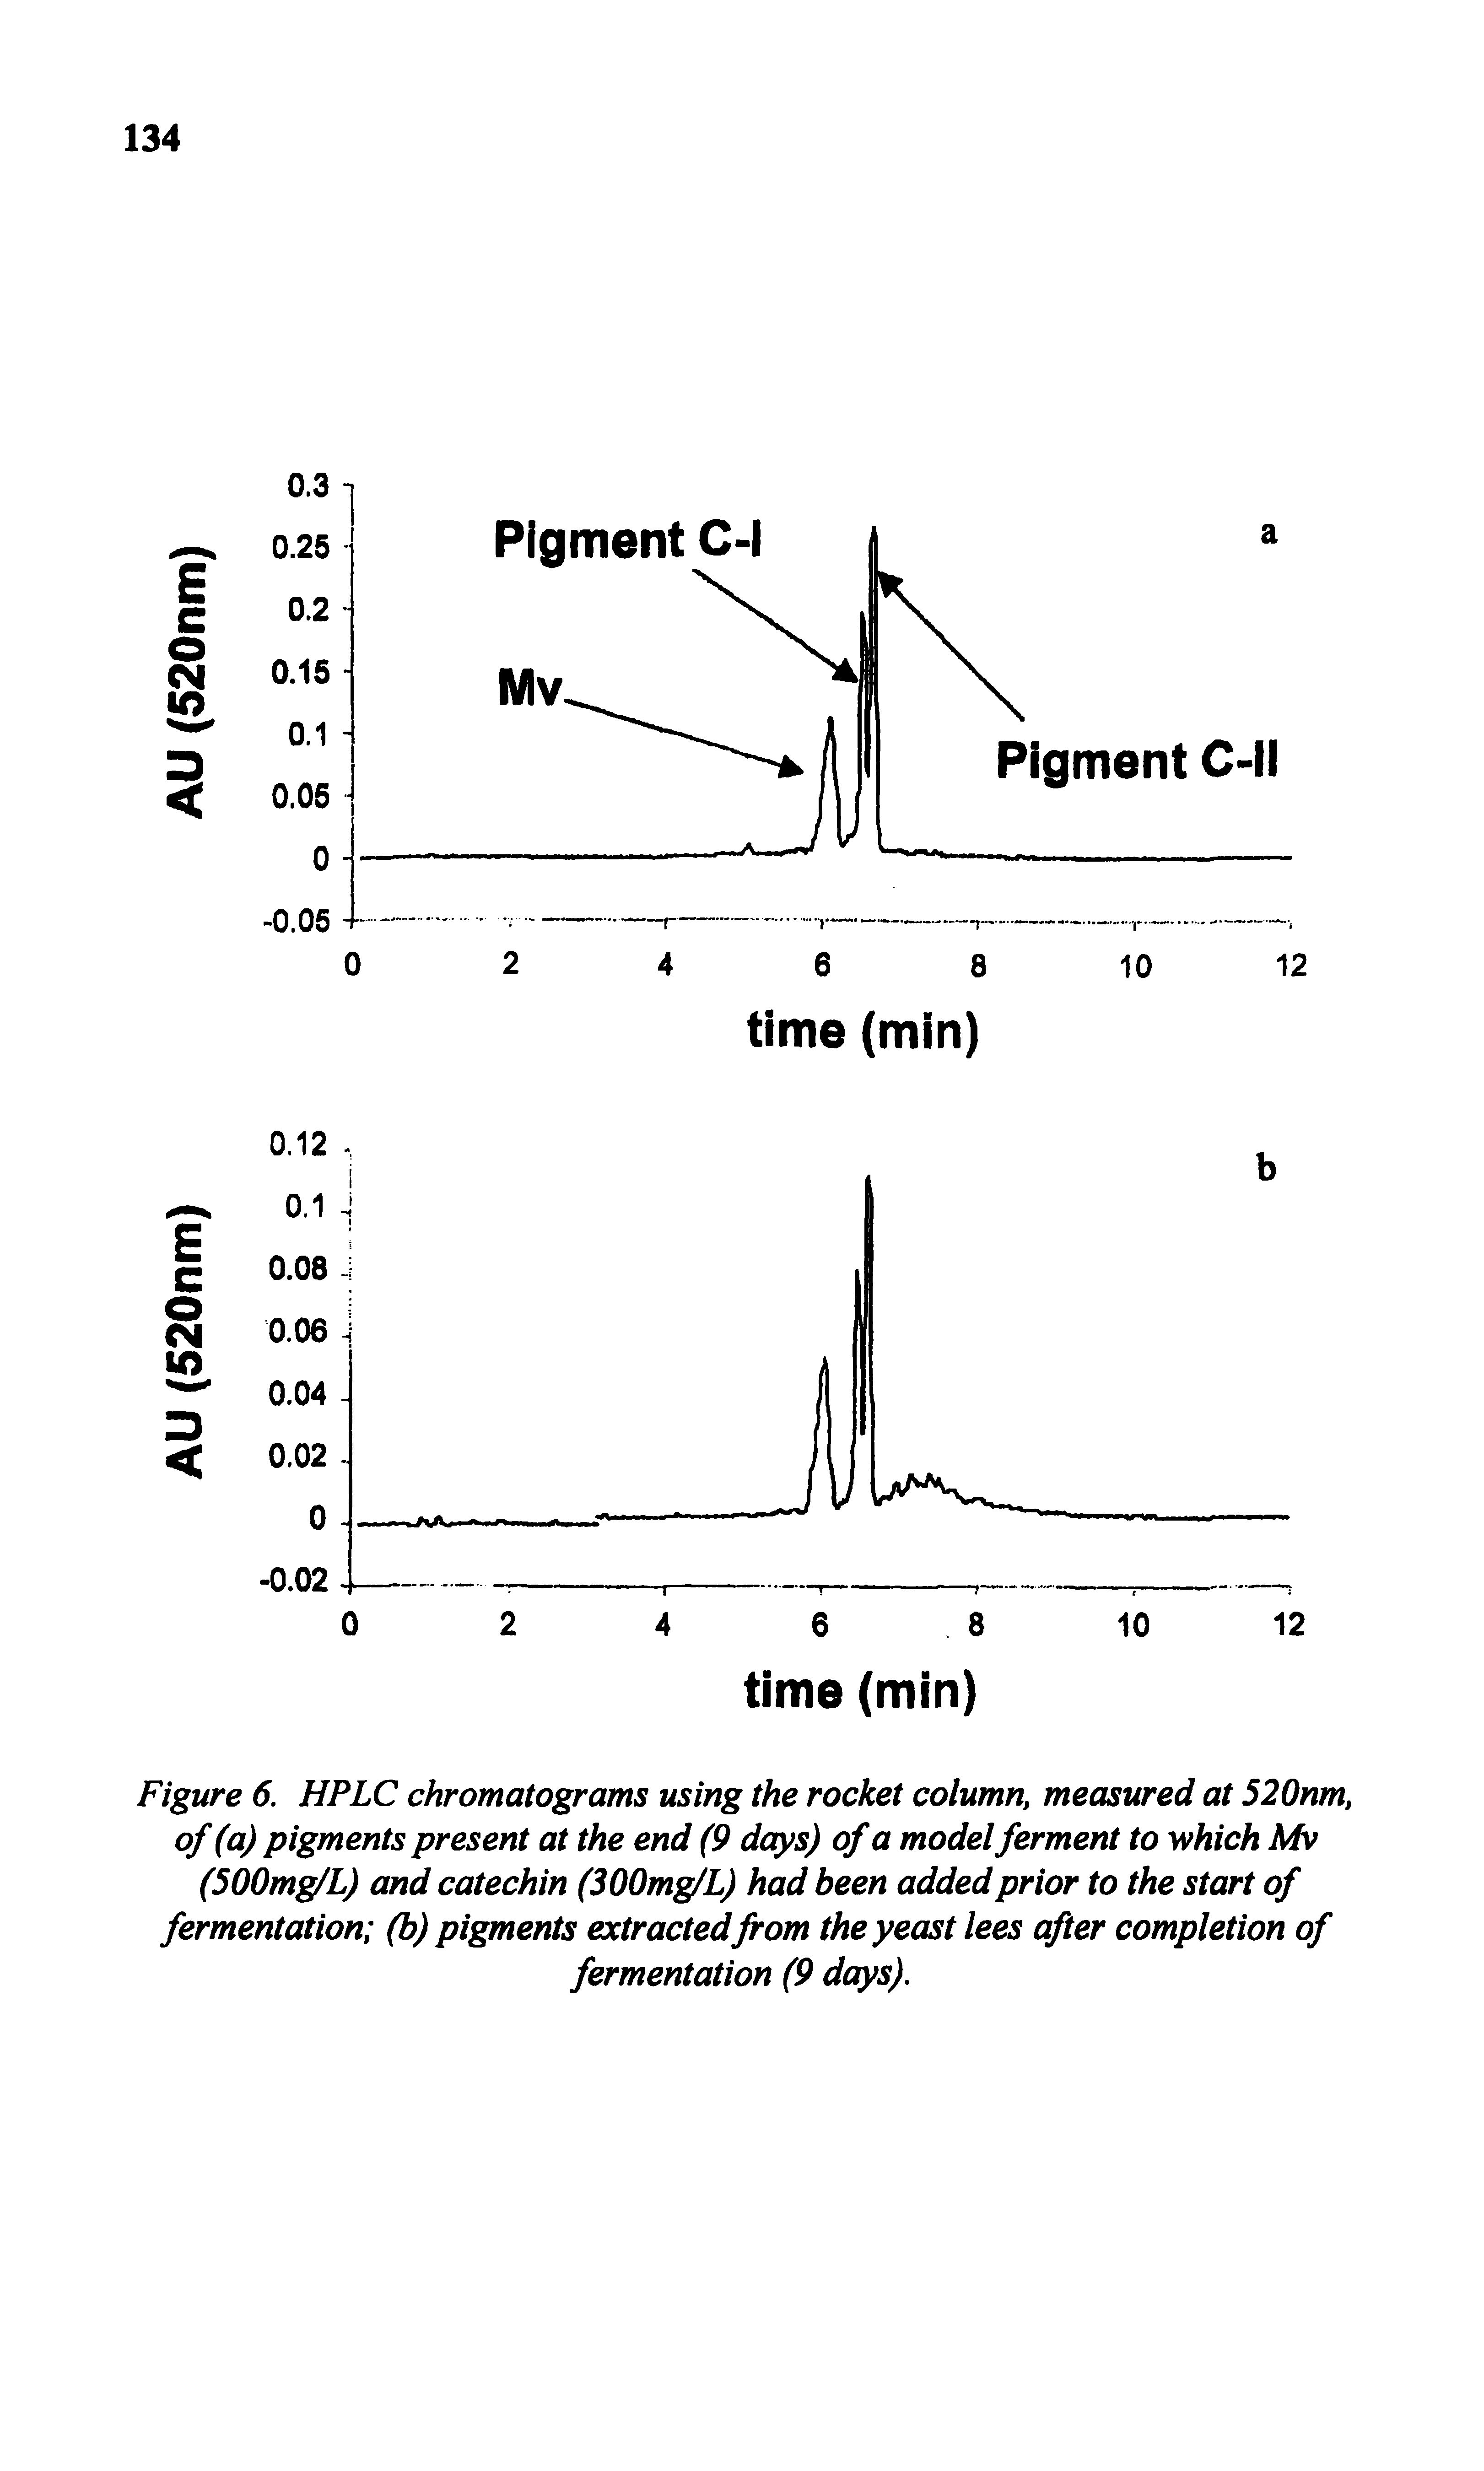 Figure 6. HPLC chromatograms using the rocket column, measured at 520nm, of (a) pigments present at the end (9 days) of a model ferment to which Mv (500mg/L) and catechin (300mg/L) had been added prior to the start of fermentation (b) pigments extracted from the yeast lees after completion of fermentation (9 days).